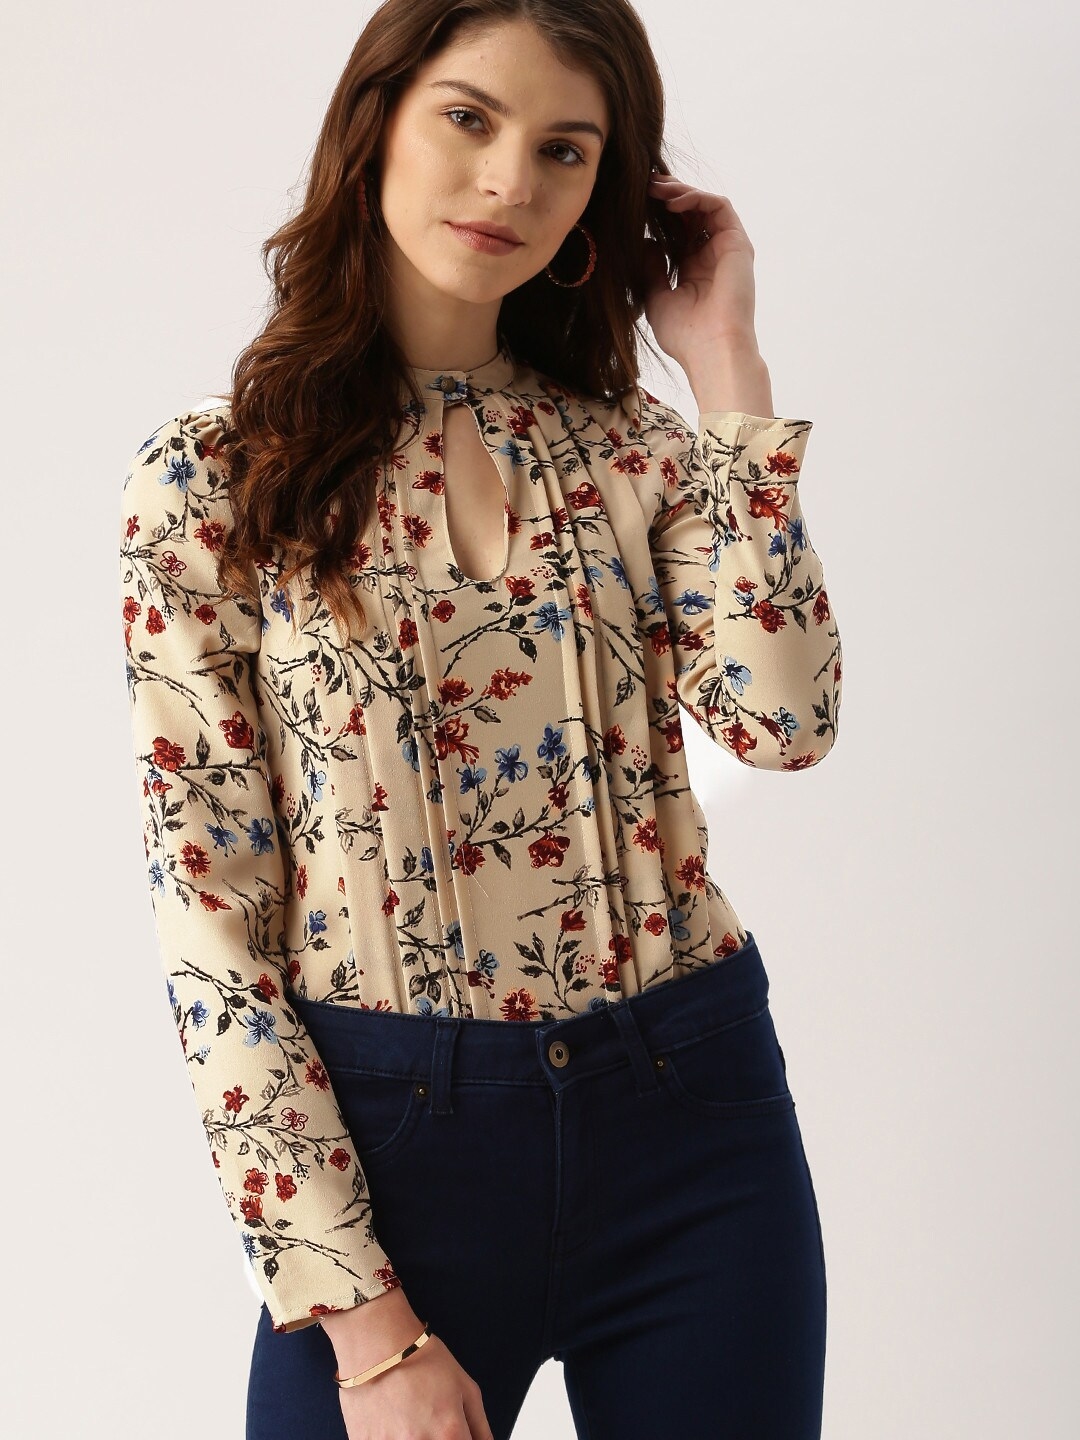 All About You Beige Floral Printed Top